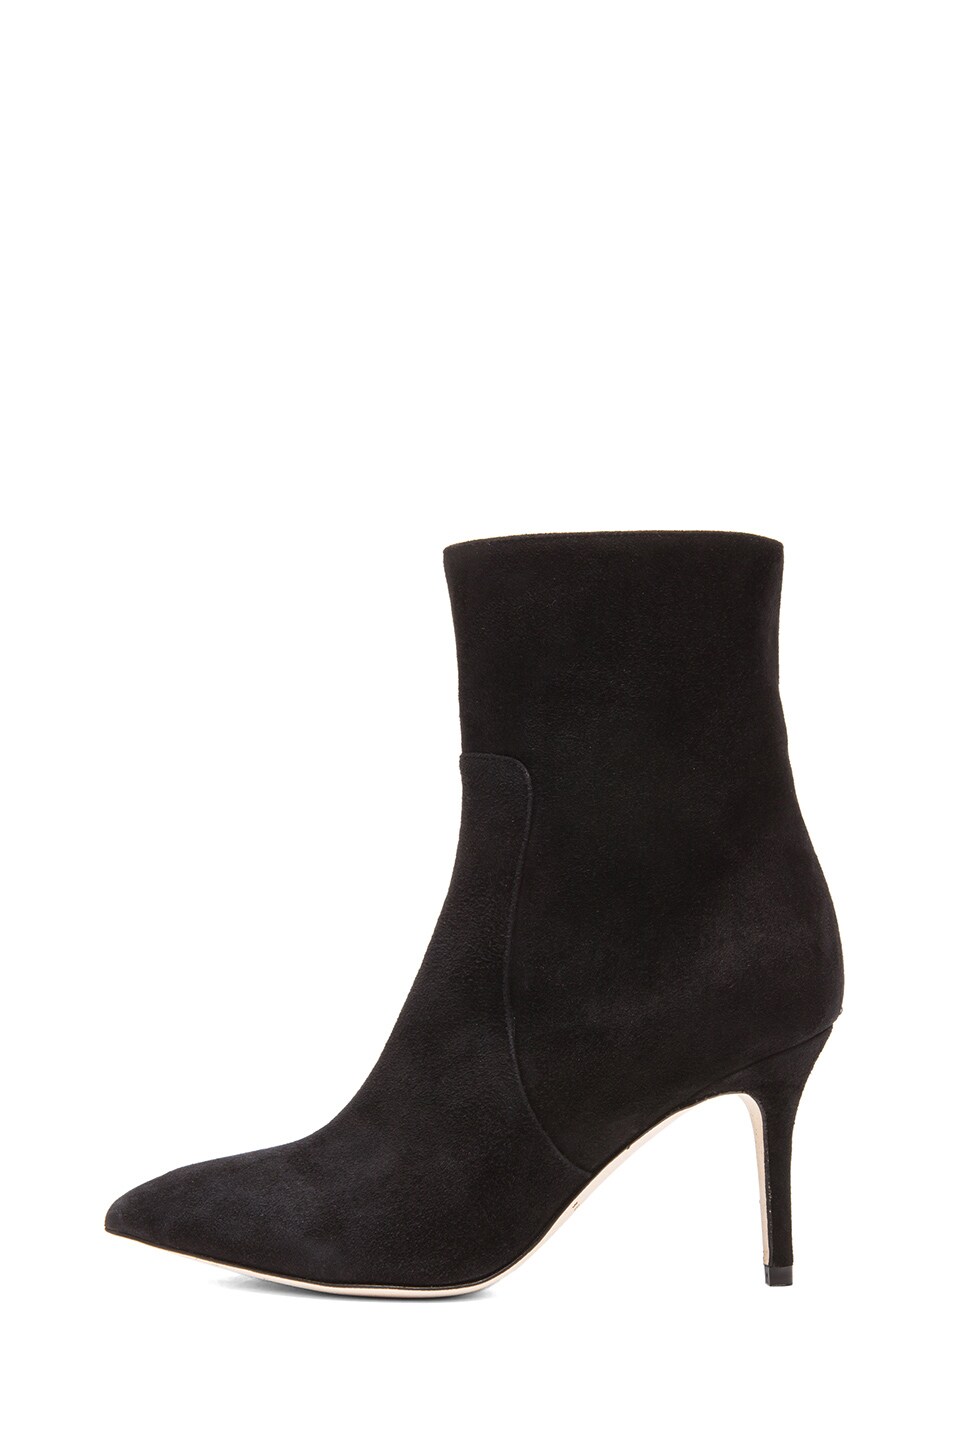 Image 1 of Brian Atwood Floran Cashmere Suede Booties in Black